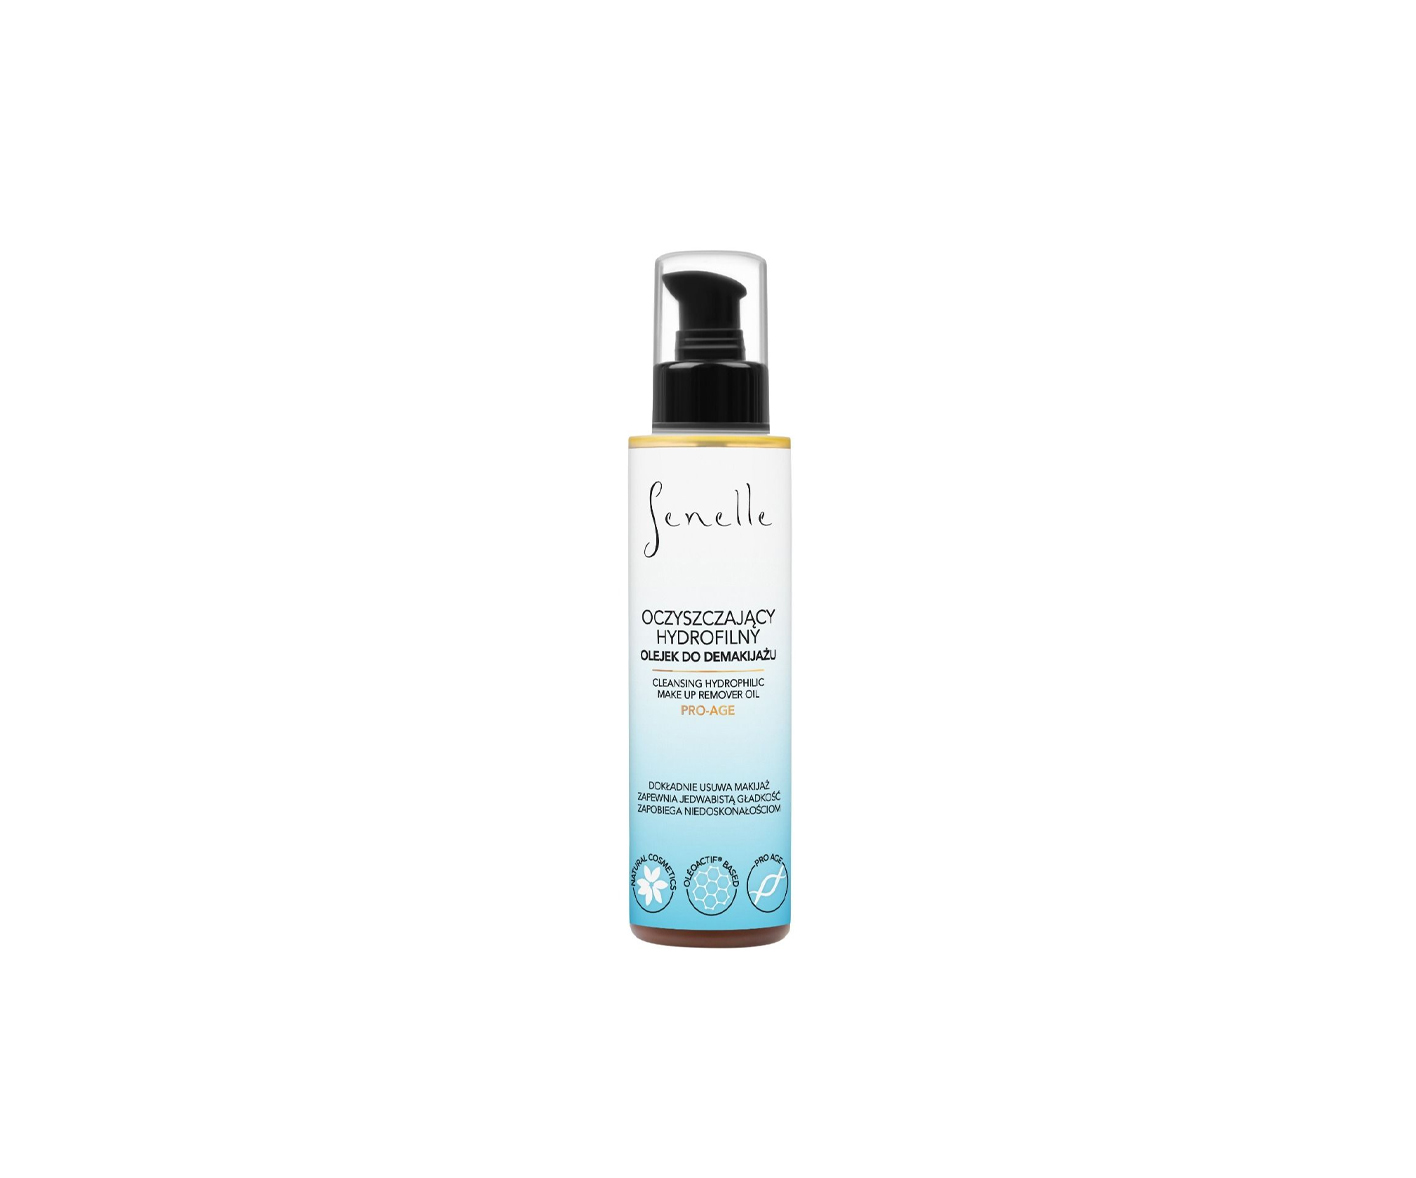 Senelle, Cleansing Makeup Remover Oil